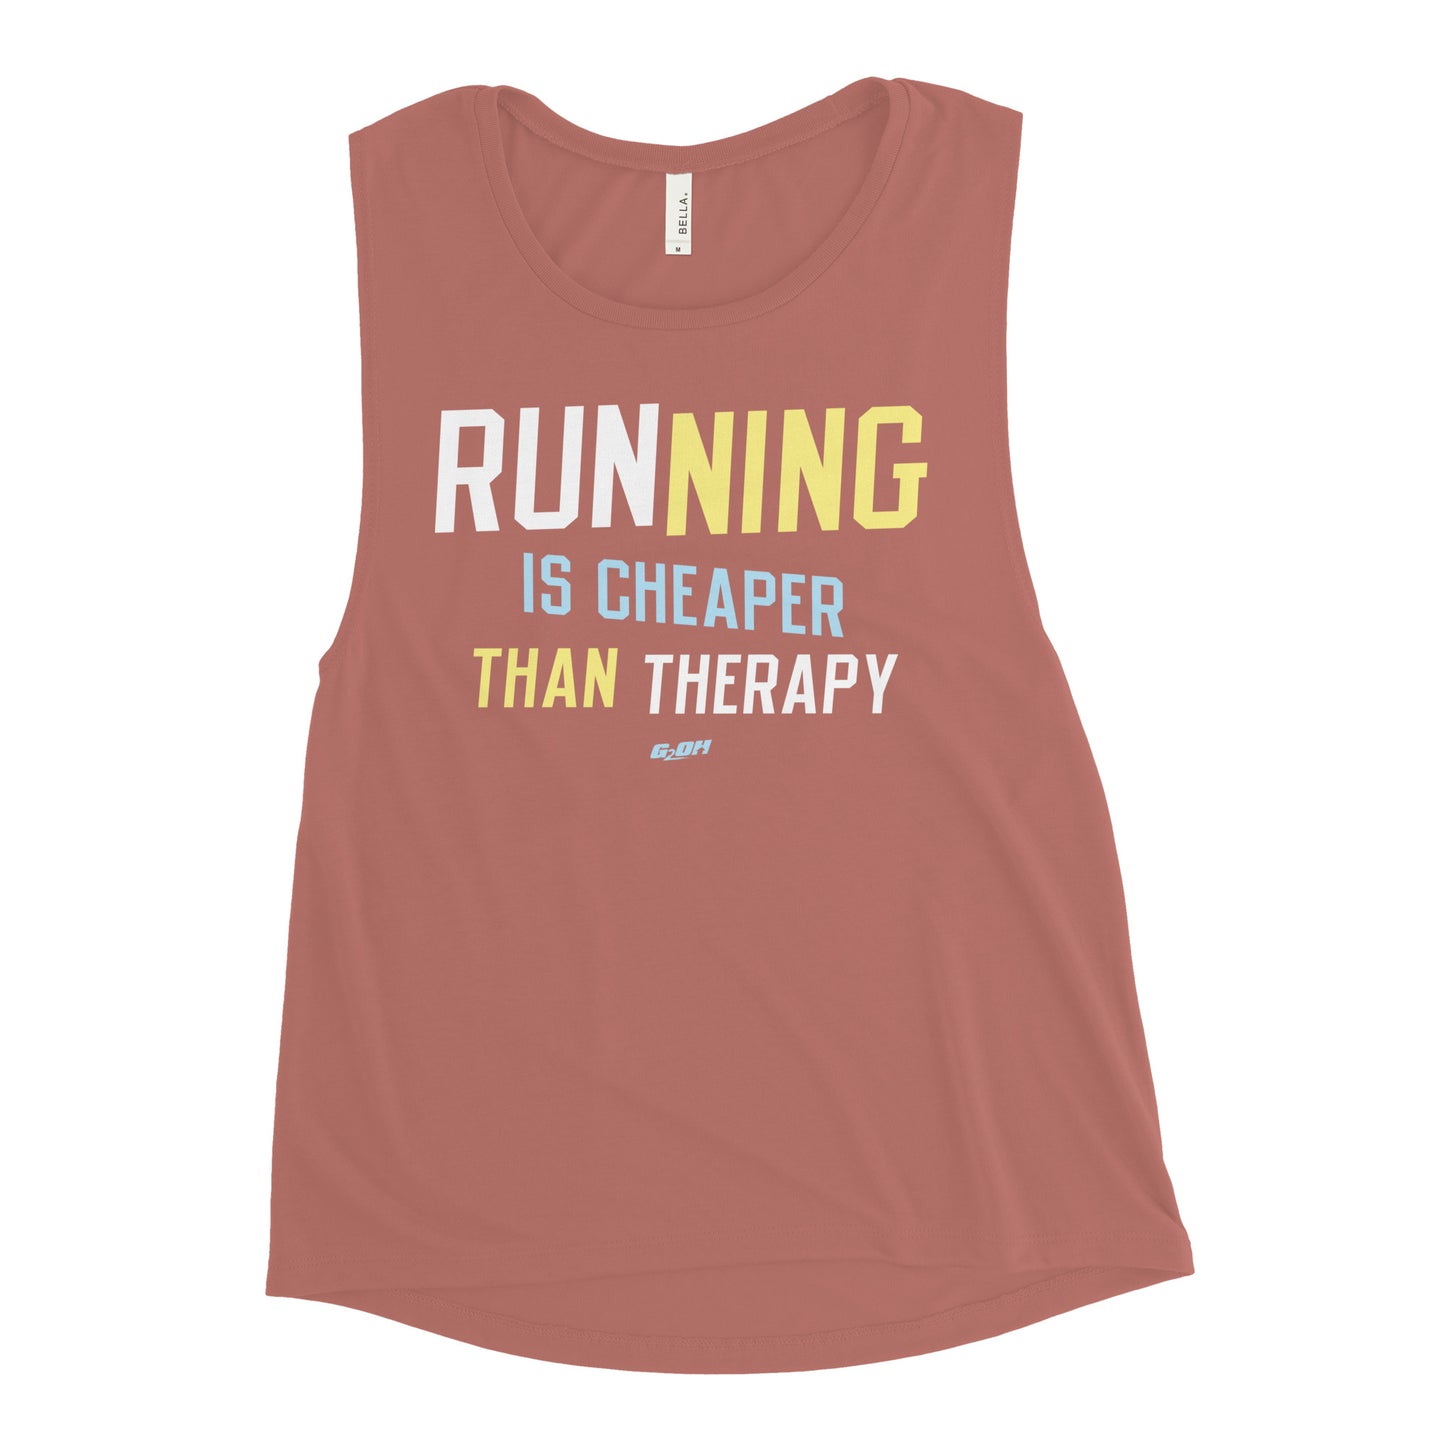 Running Is Cheaper Than Therapy Women's Muscle Tank